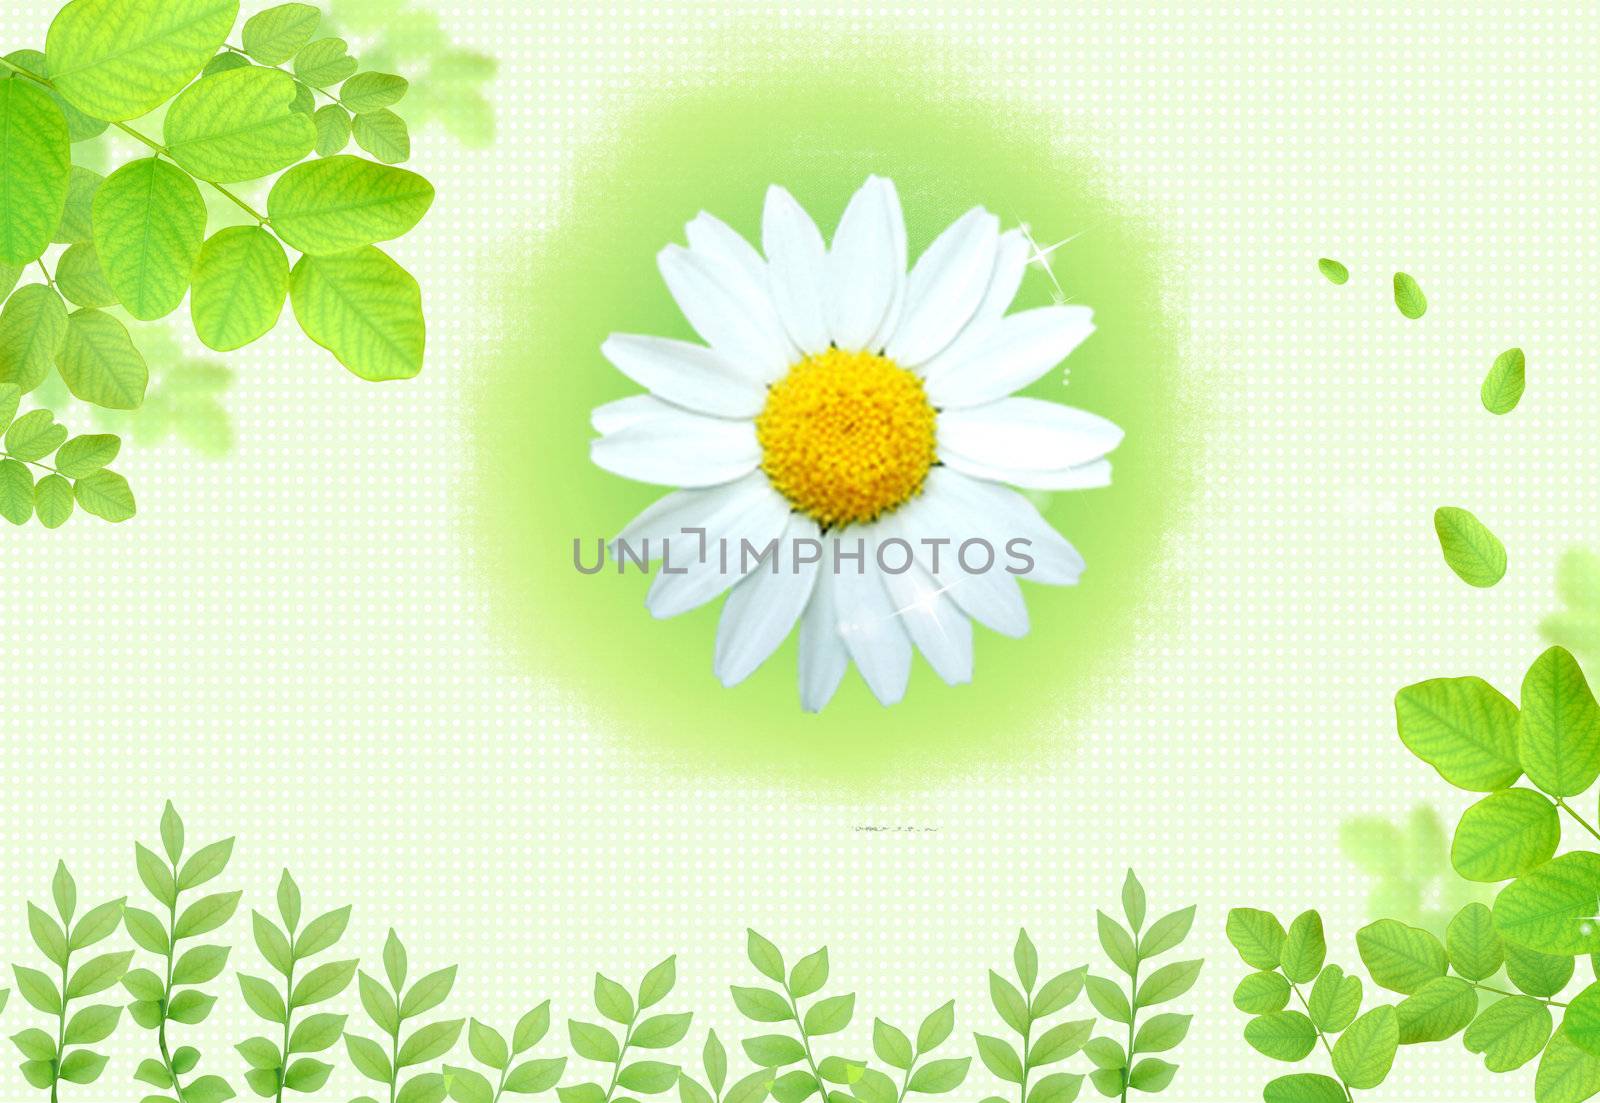 Nice daisy on wonderful background with green leaves